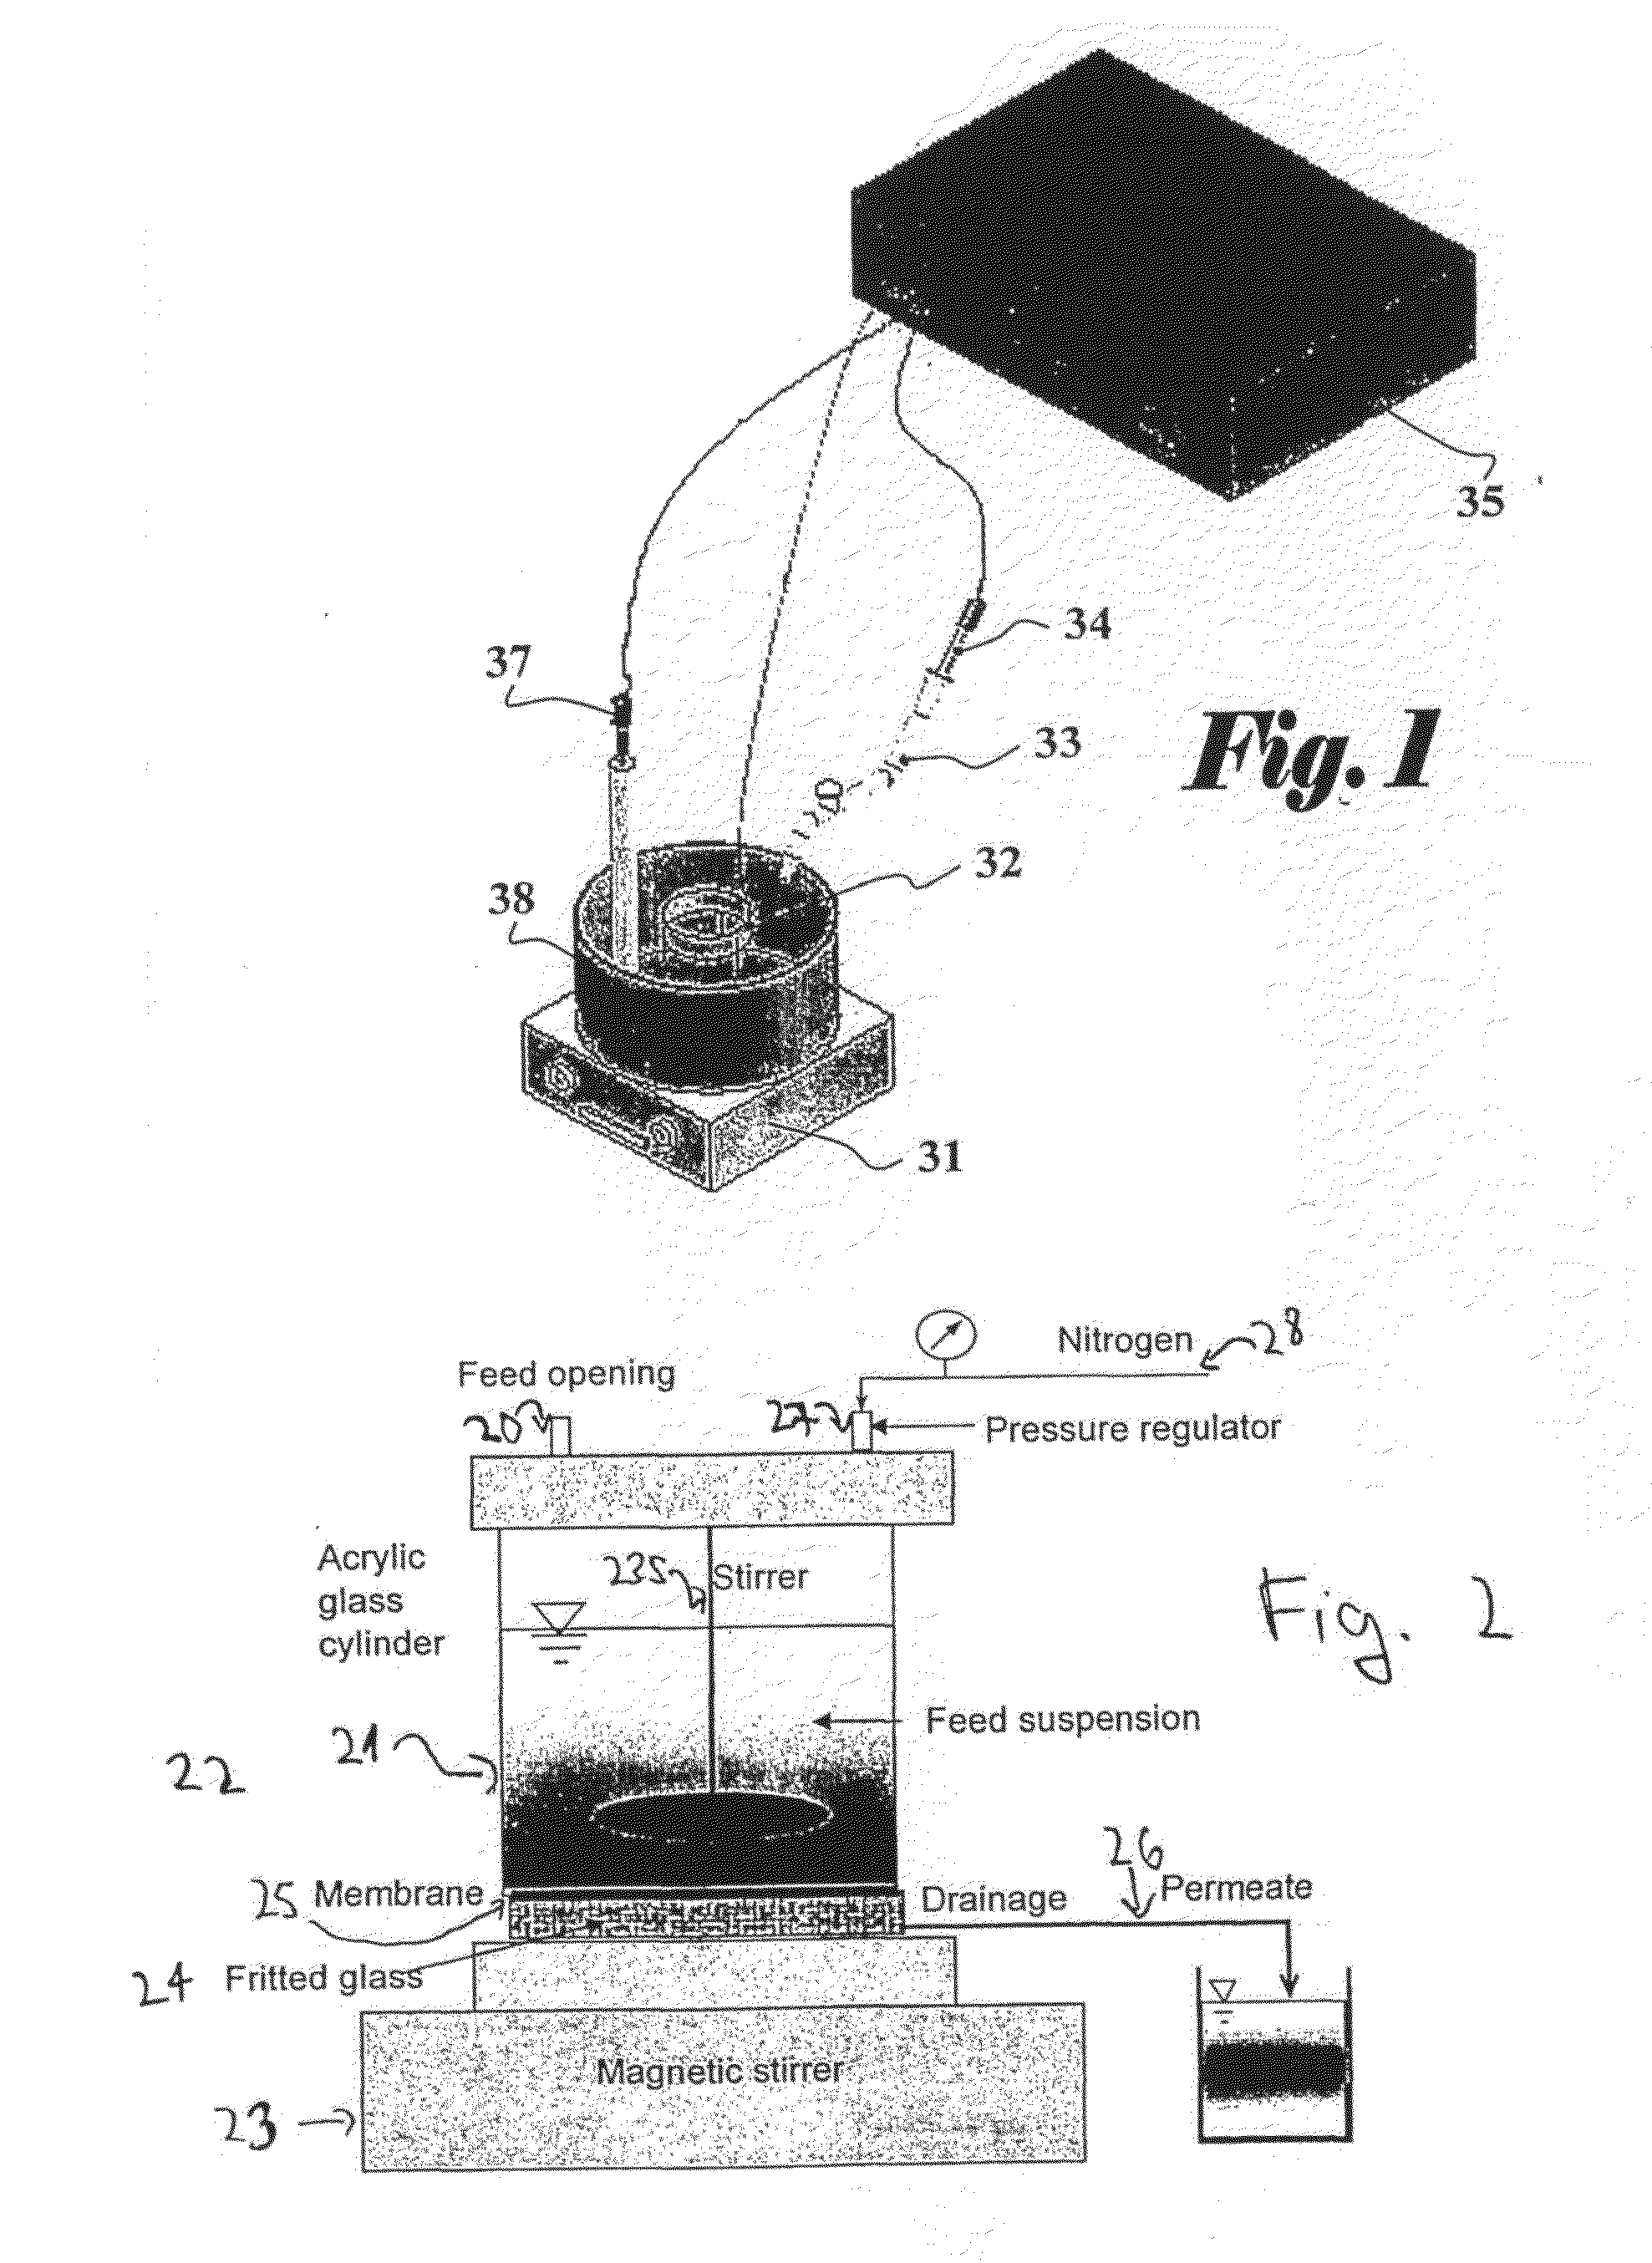 Method for Testing the Integrity of Membranes